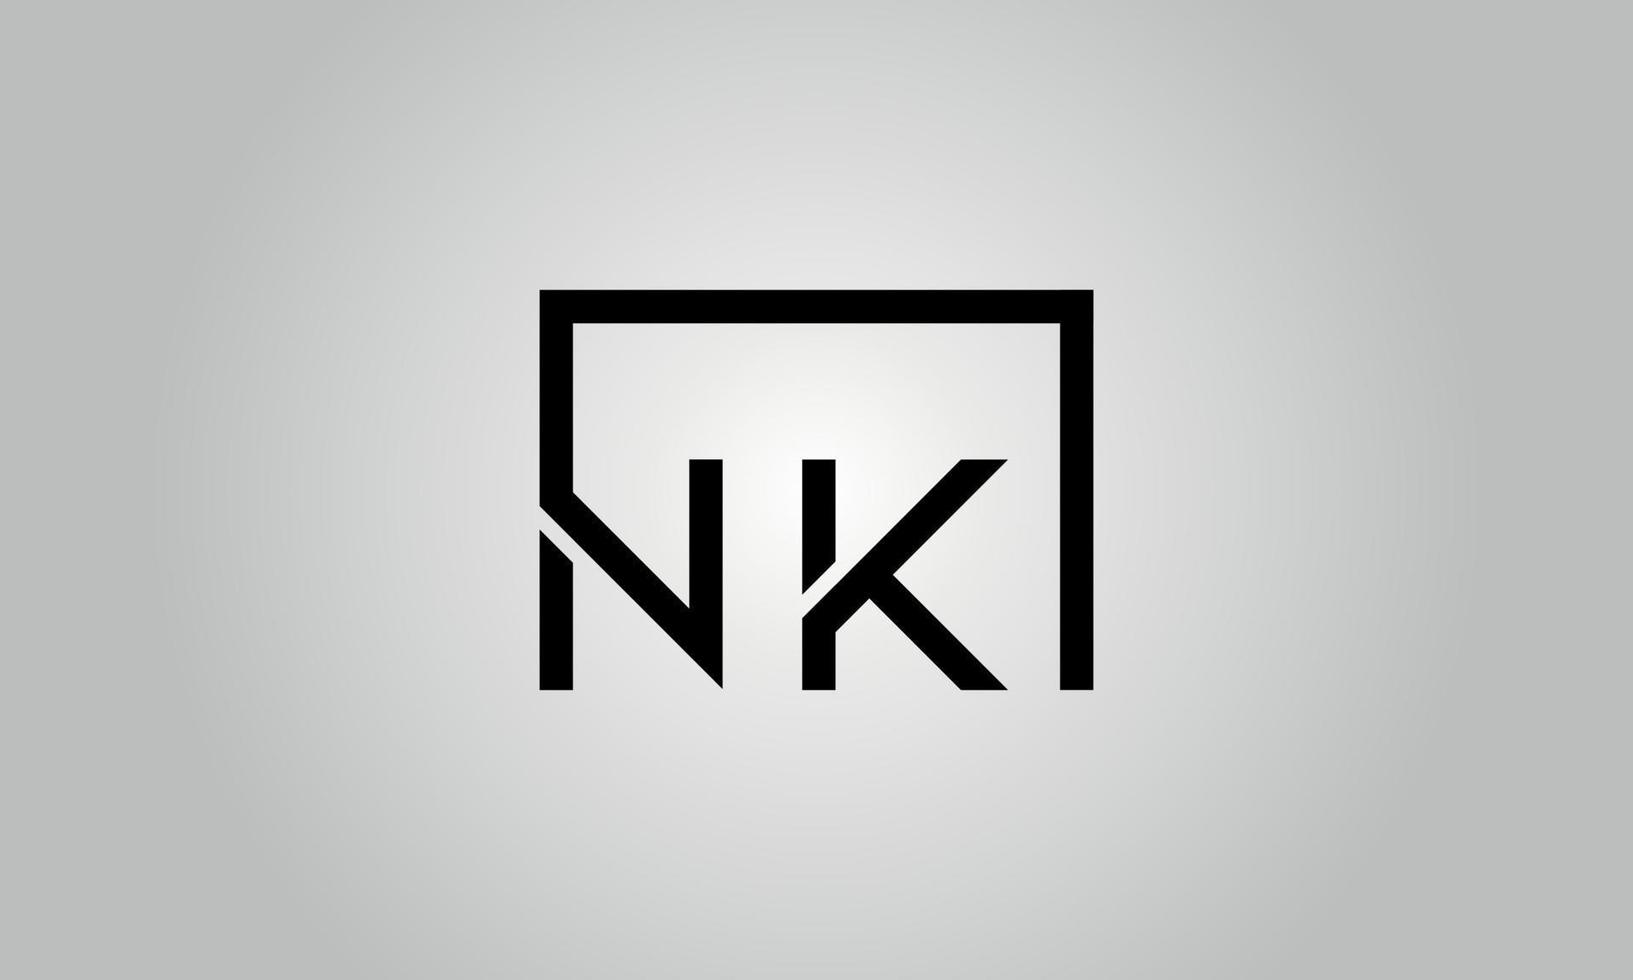 Letter NK logo design. NK logo with square shape in black colors vector free vector template.